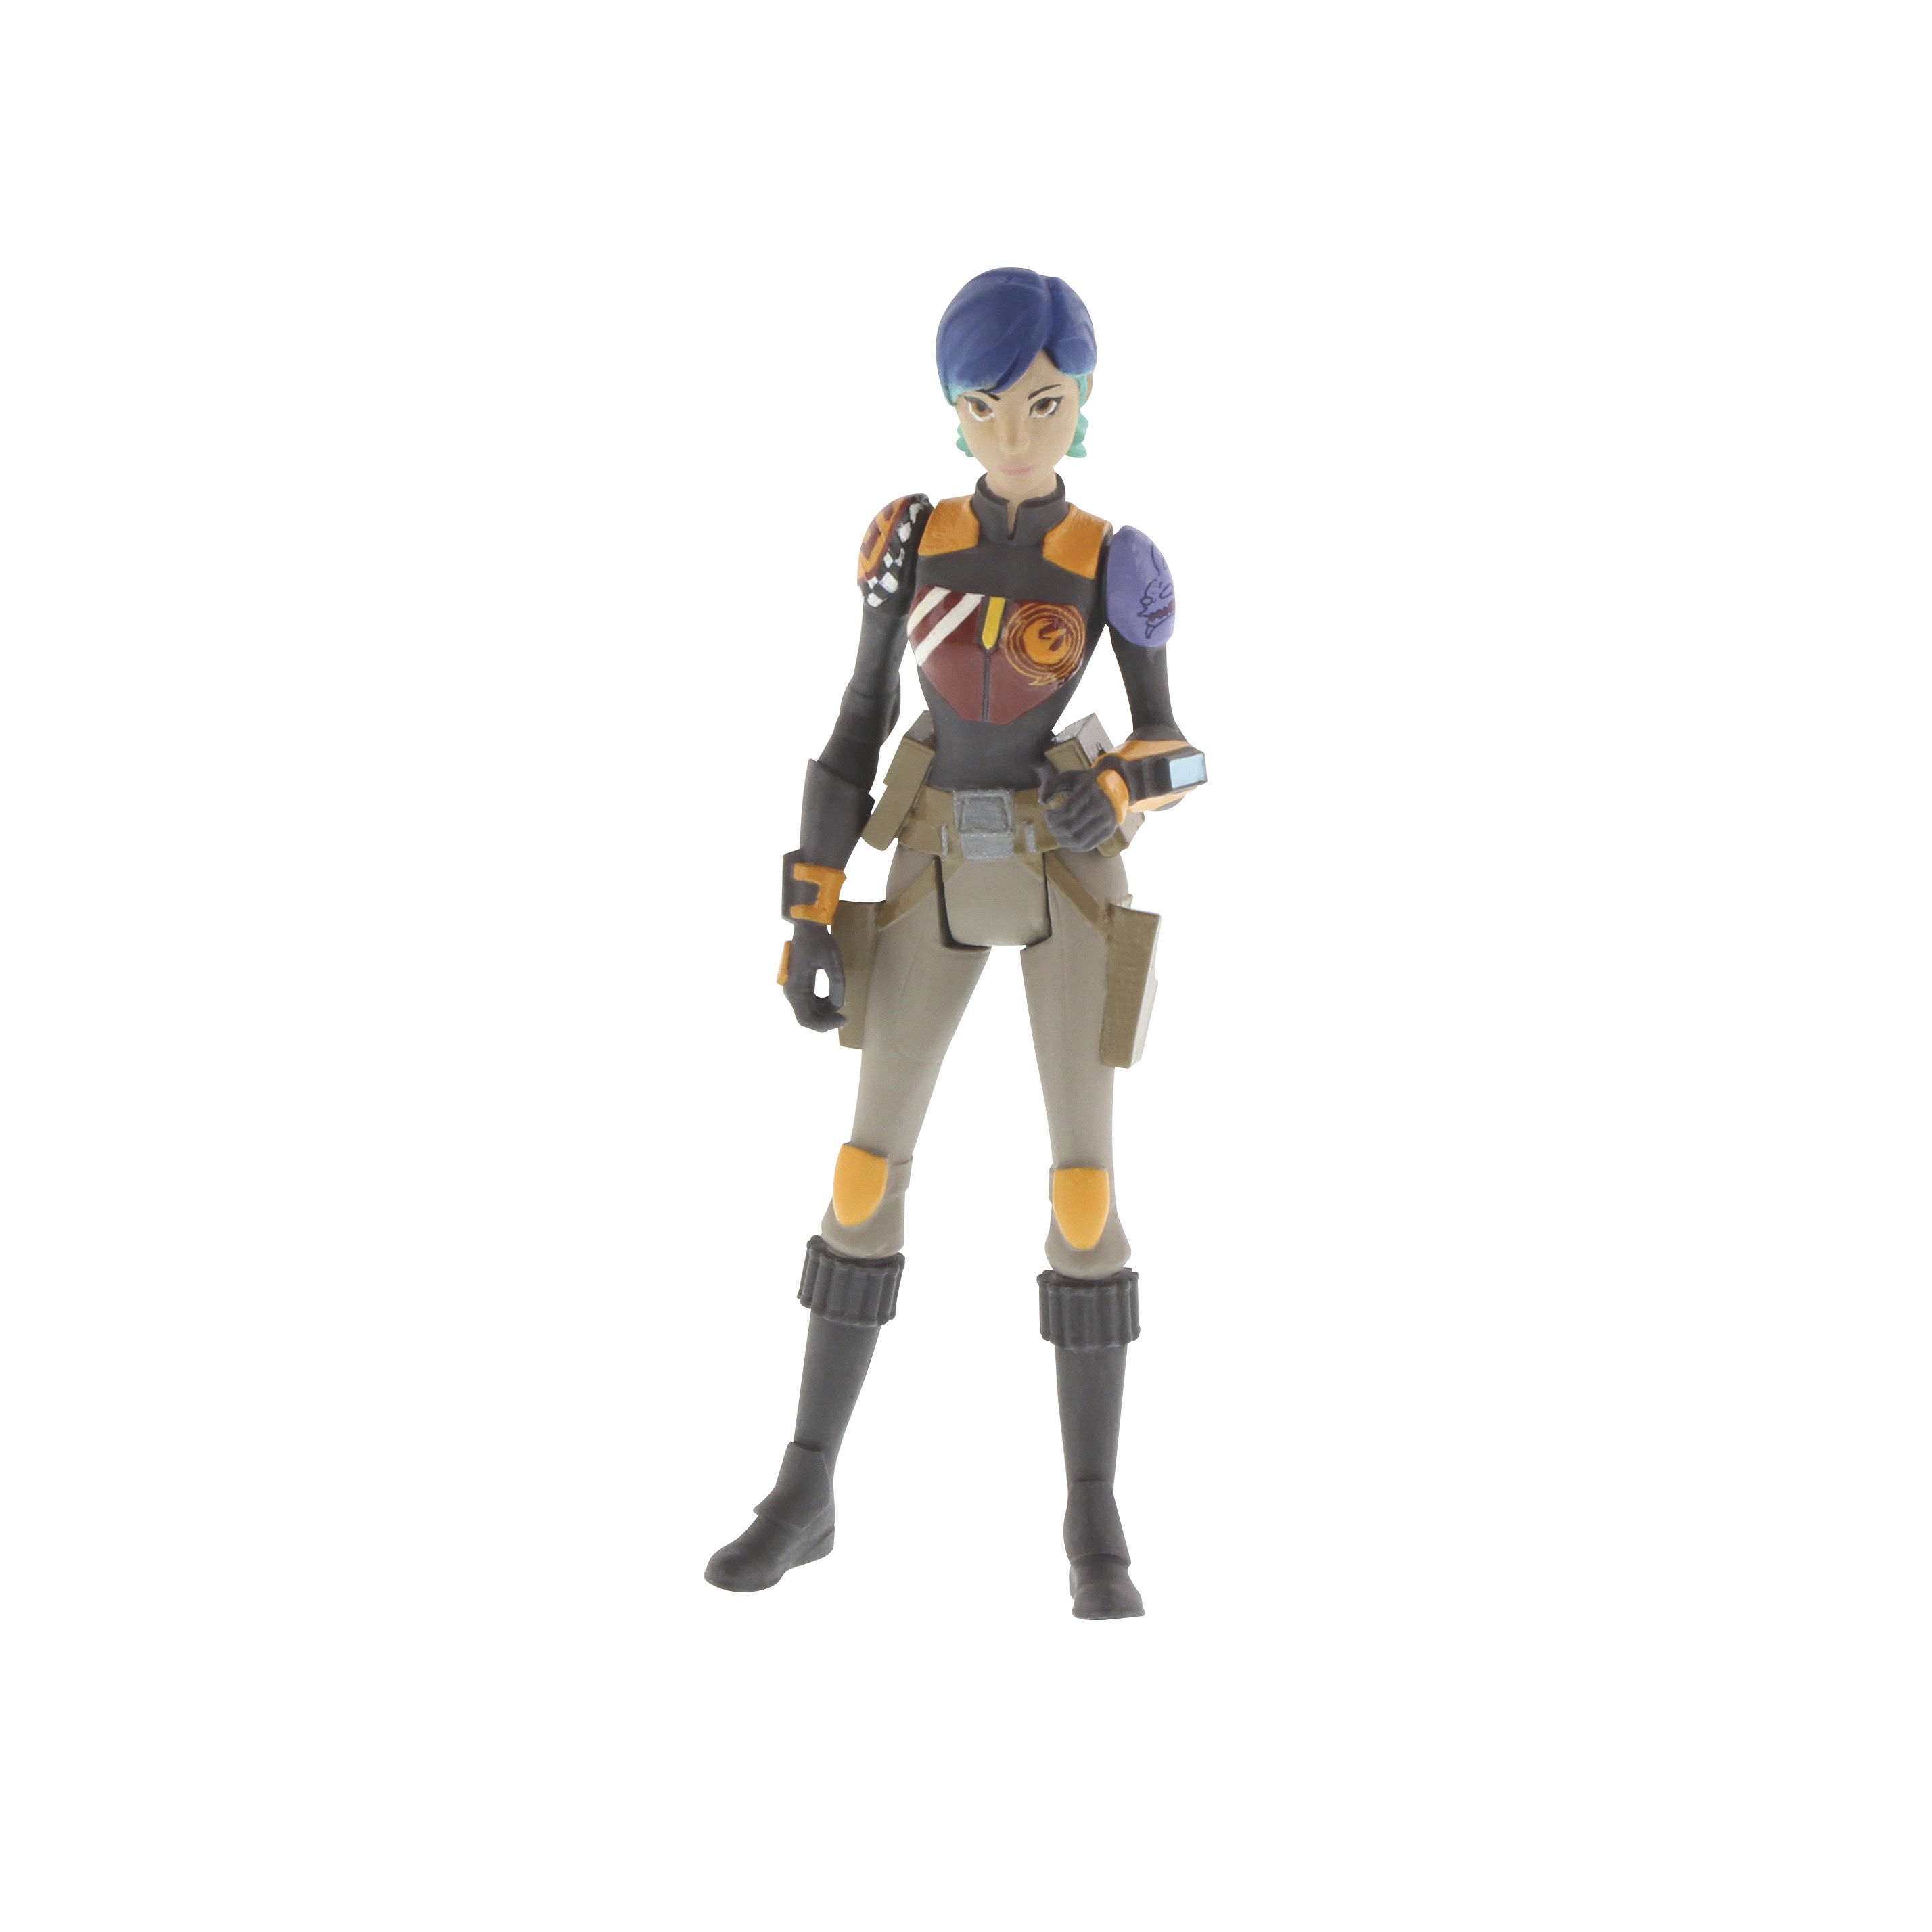 Sabine1 Large 300DPI Large Batch of Hasbro Marvel & Star Wars Figure Images From Toy Fair